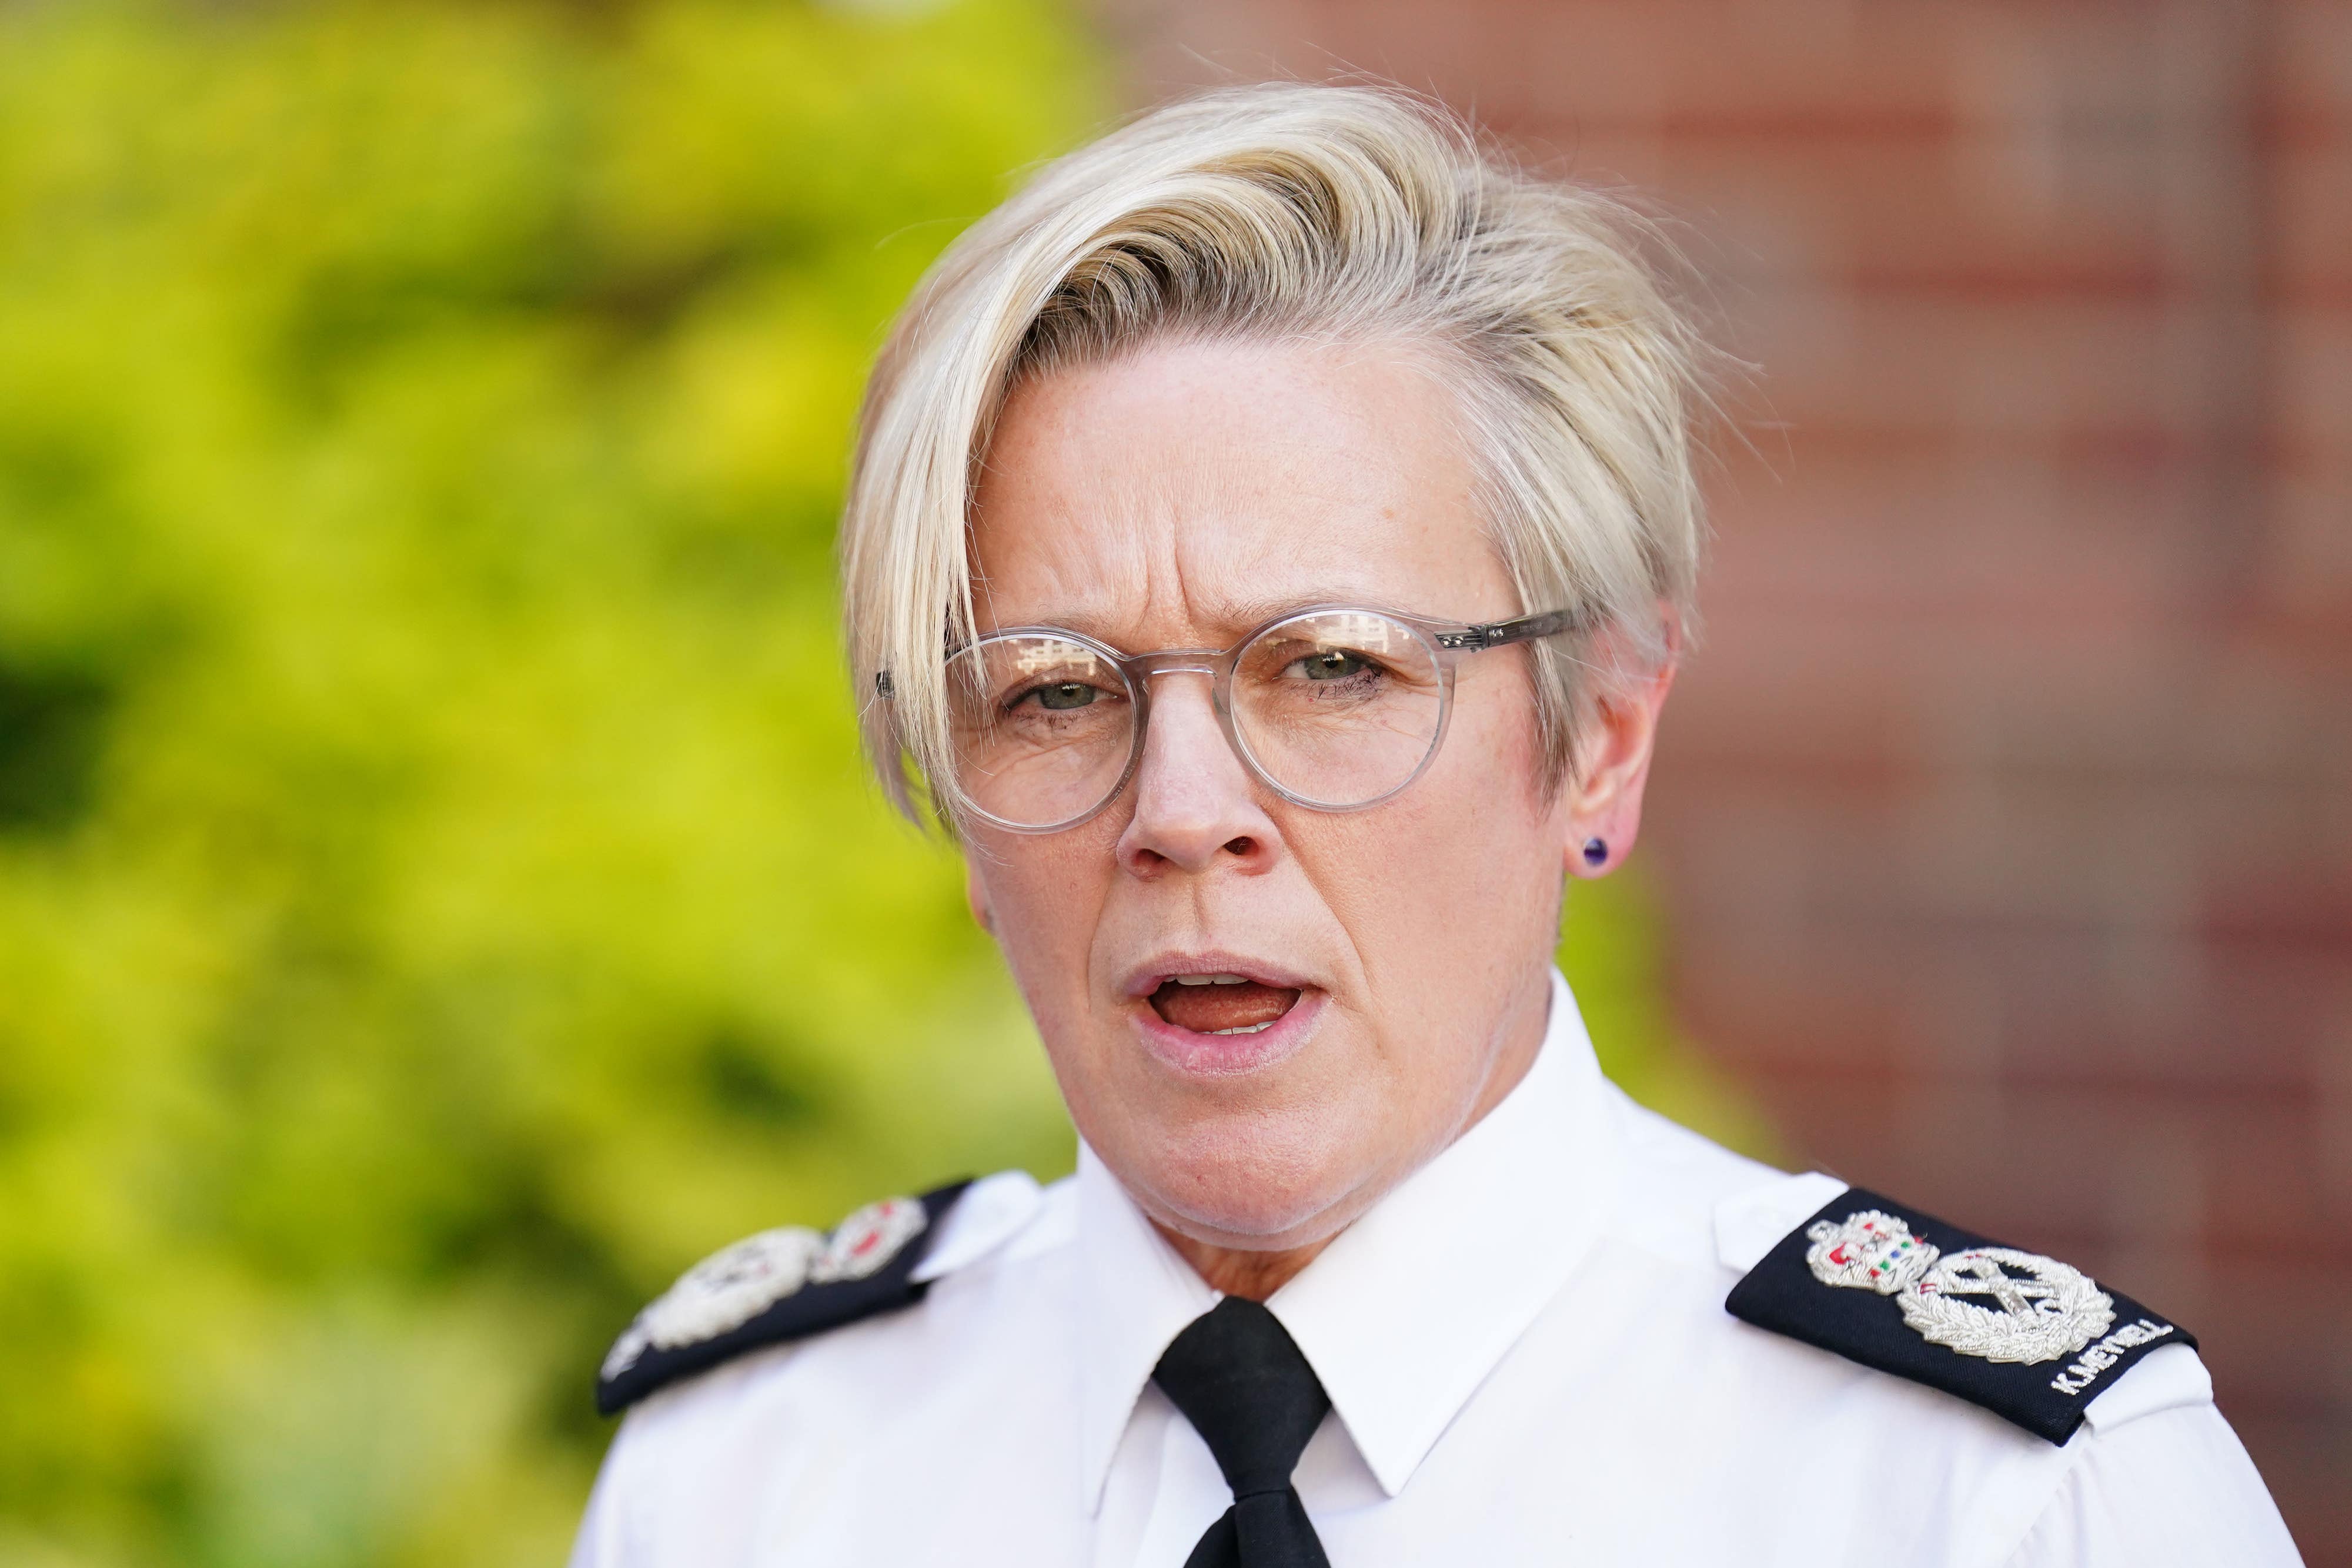 Nottinghamshire Police’s chief constable Kate Meynell